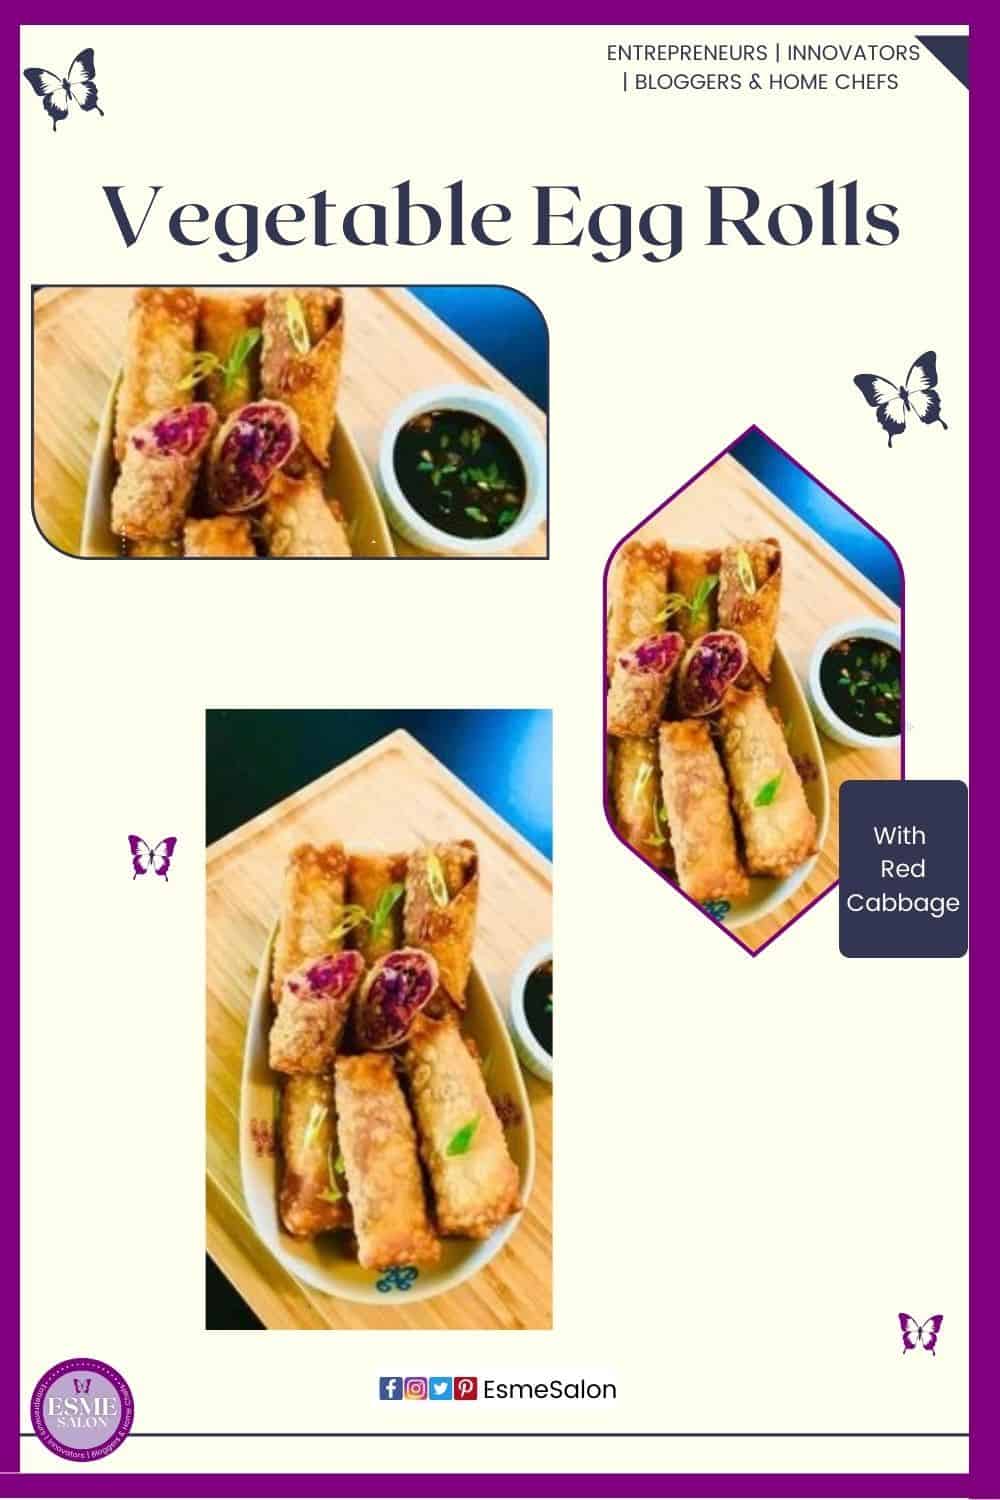 Vegetable Egg Roll with red cabbage